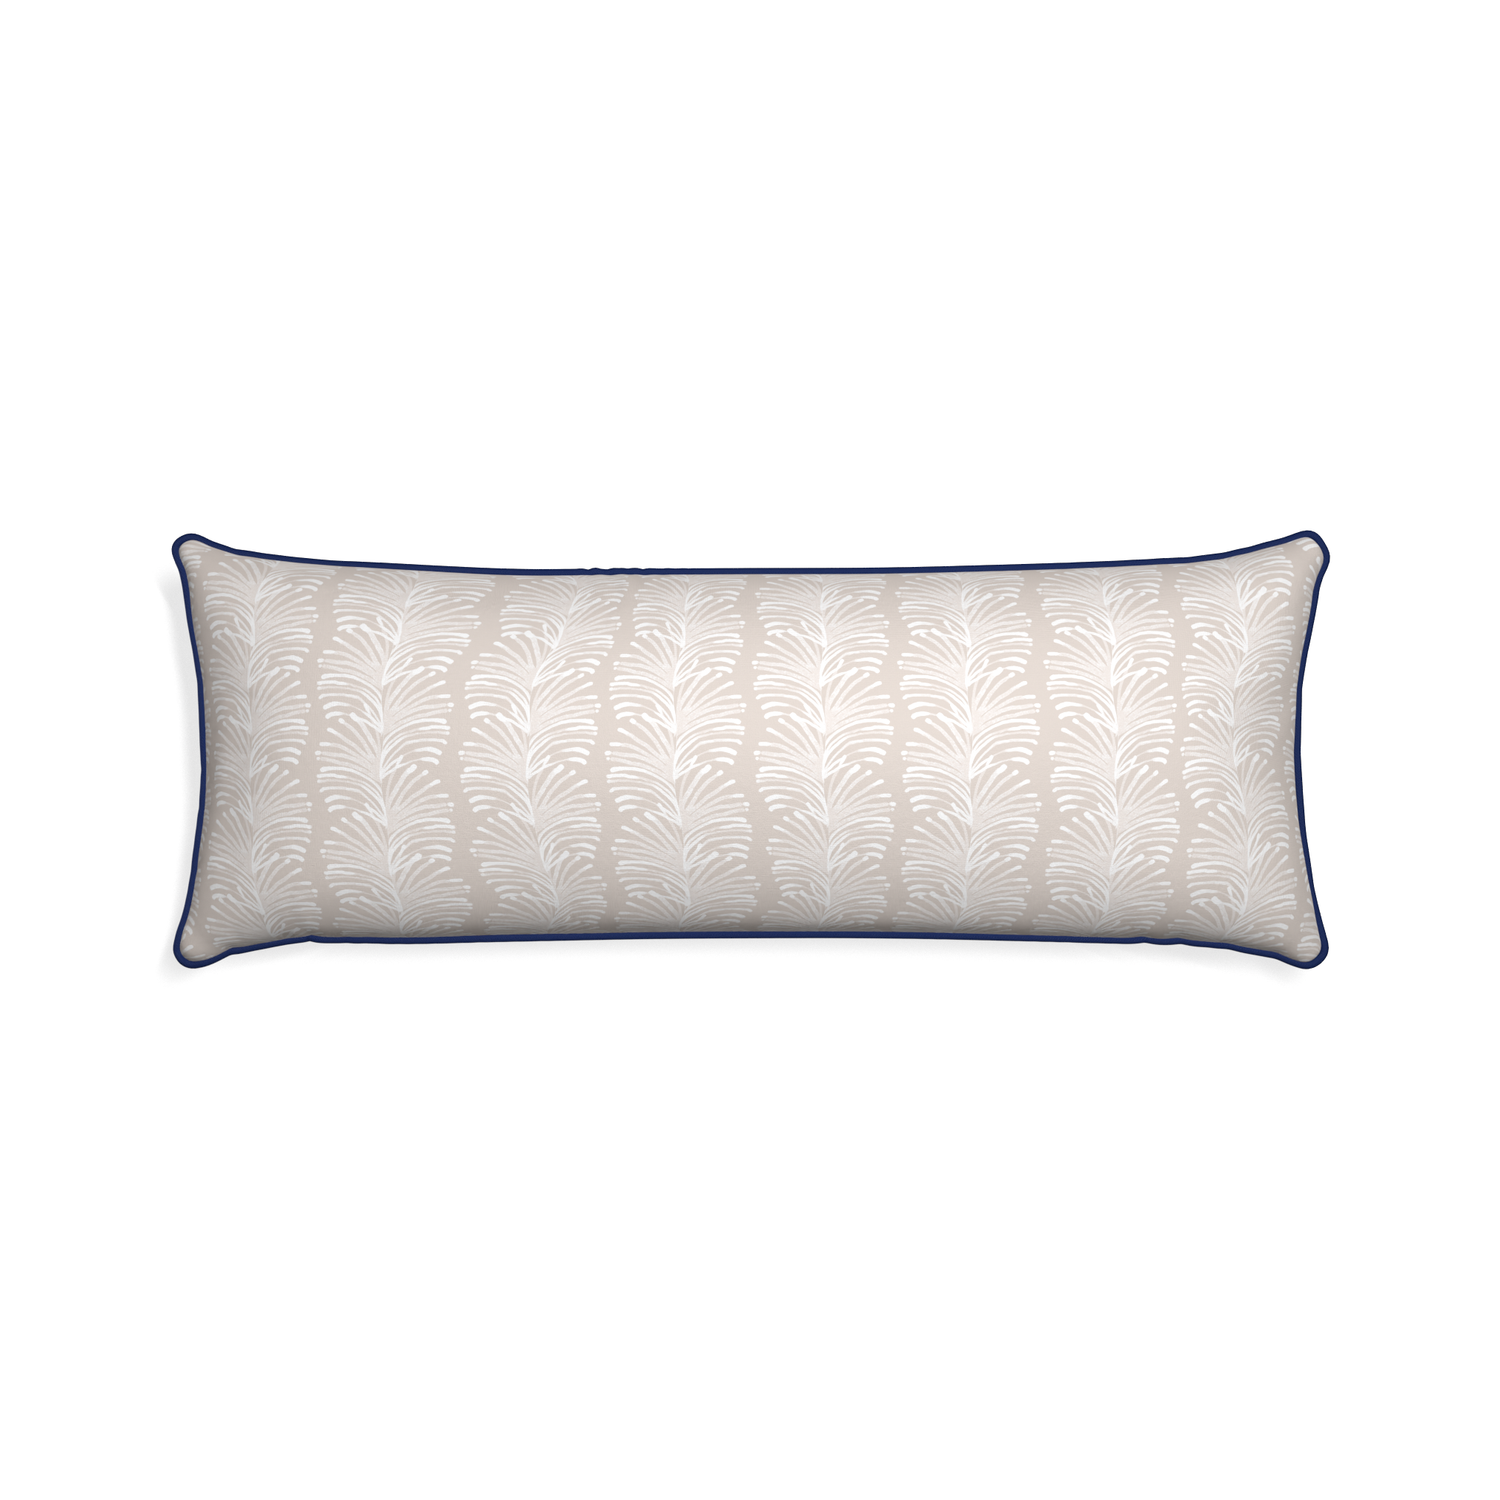 Xl-lumbar emma sand custom pillow with midnight piping on white background